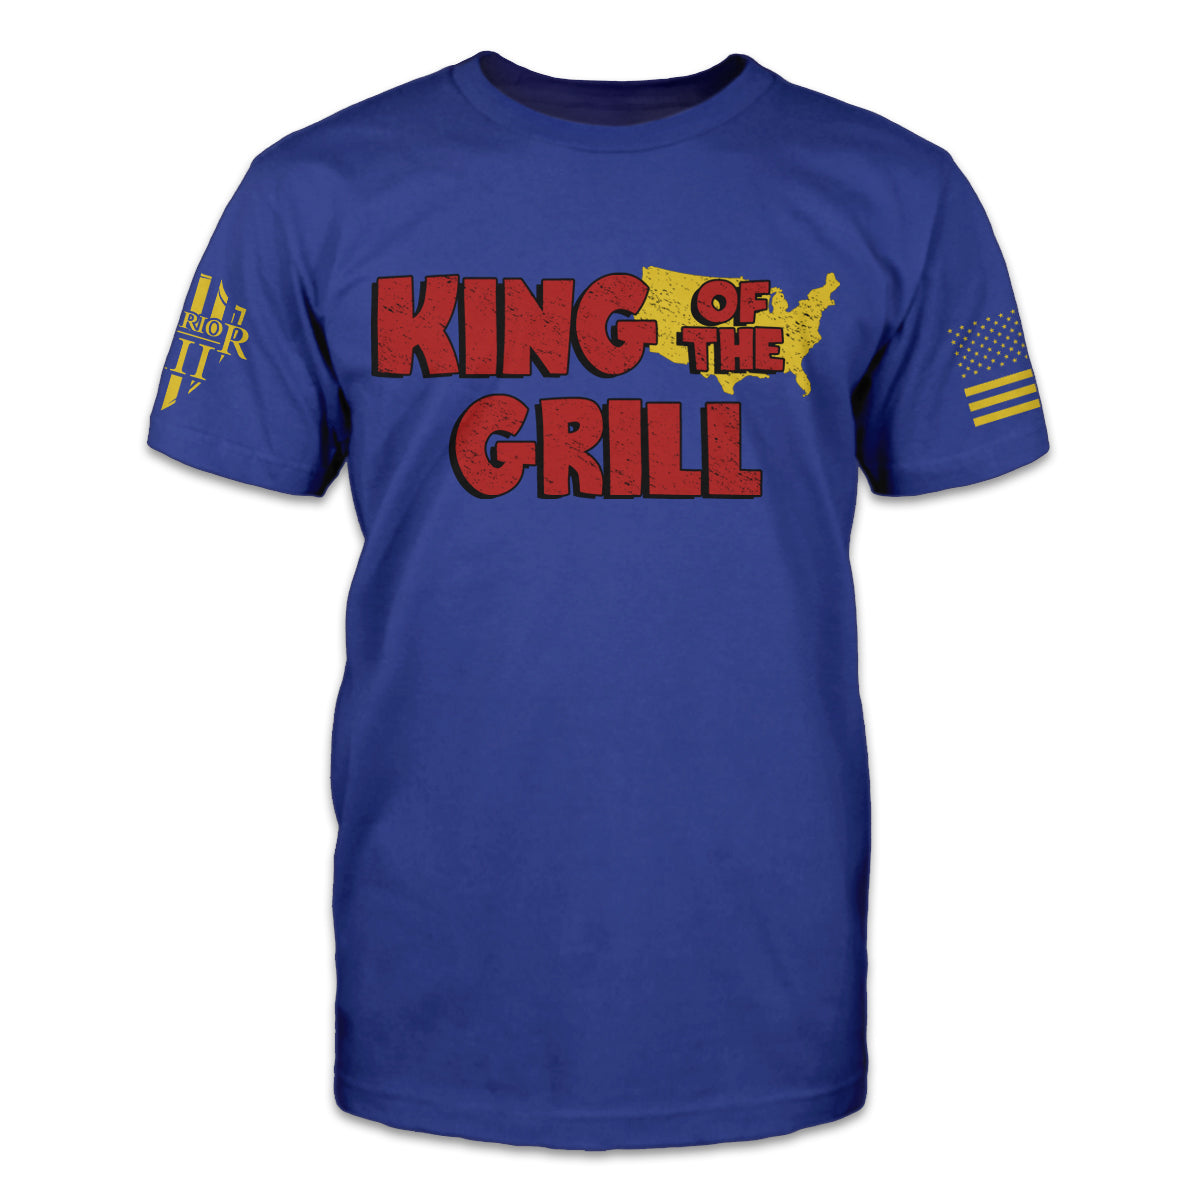 A blue t-shirt with the words "king of the grill" printed on the front.